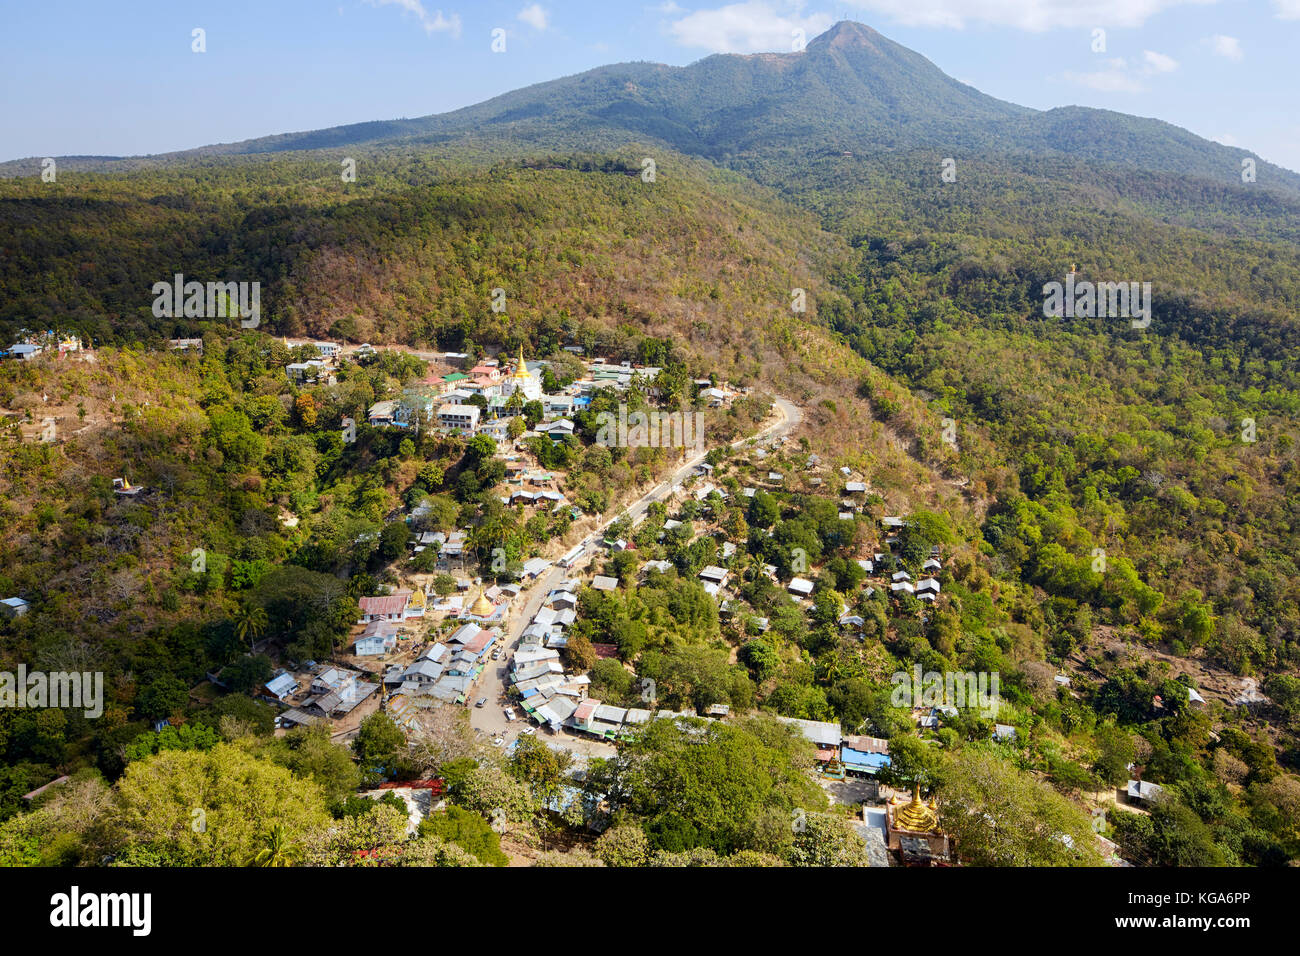 View of Mount Popa National Park from Mount Popa, Myanmar (Burma), Southeast Asia Stock Photo